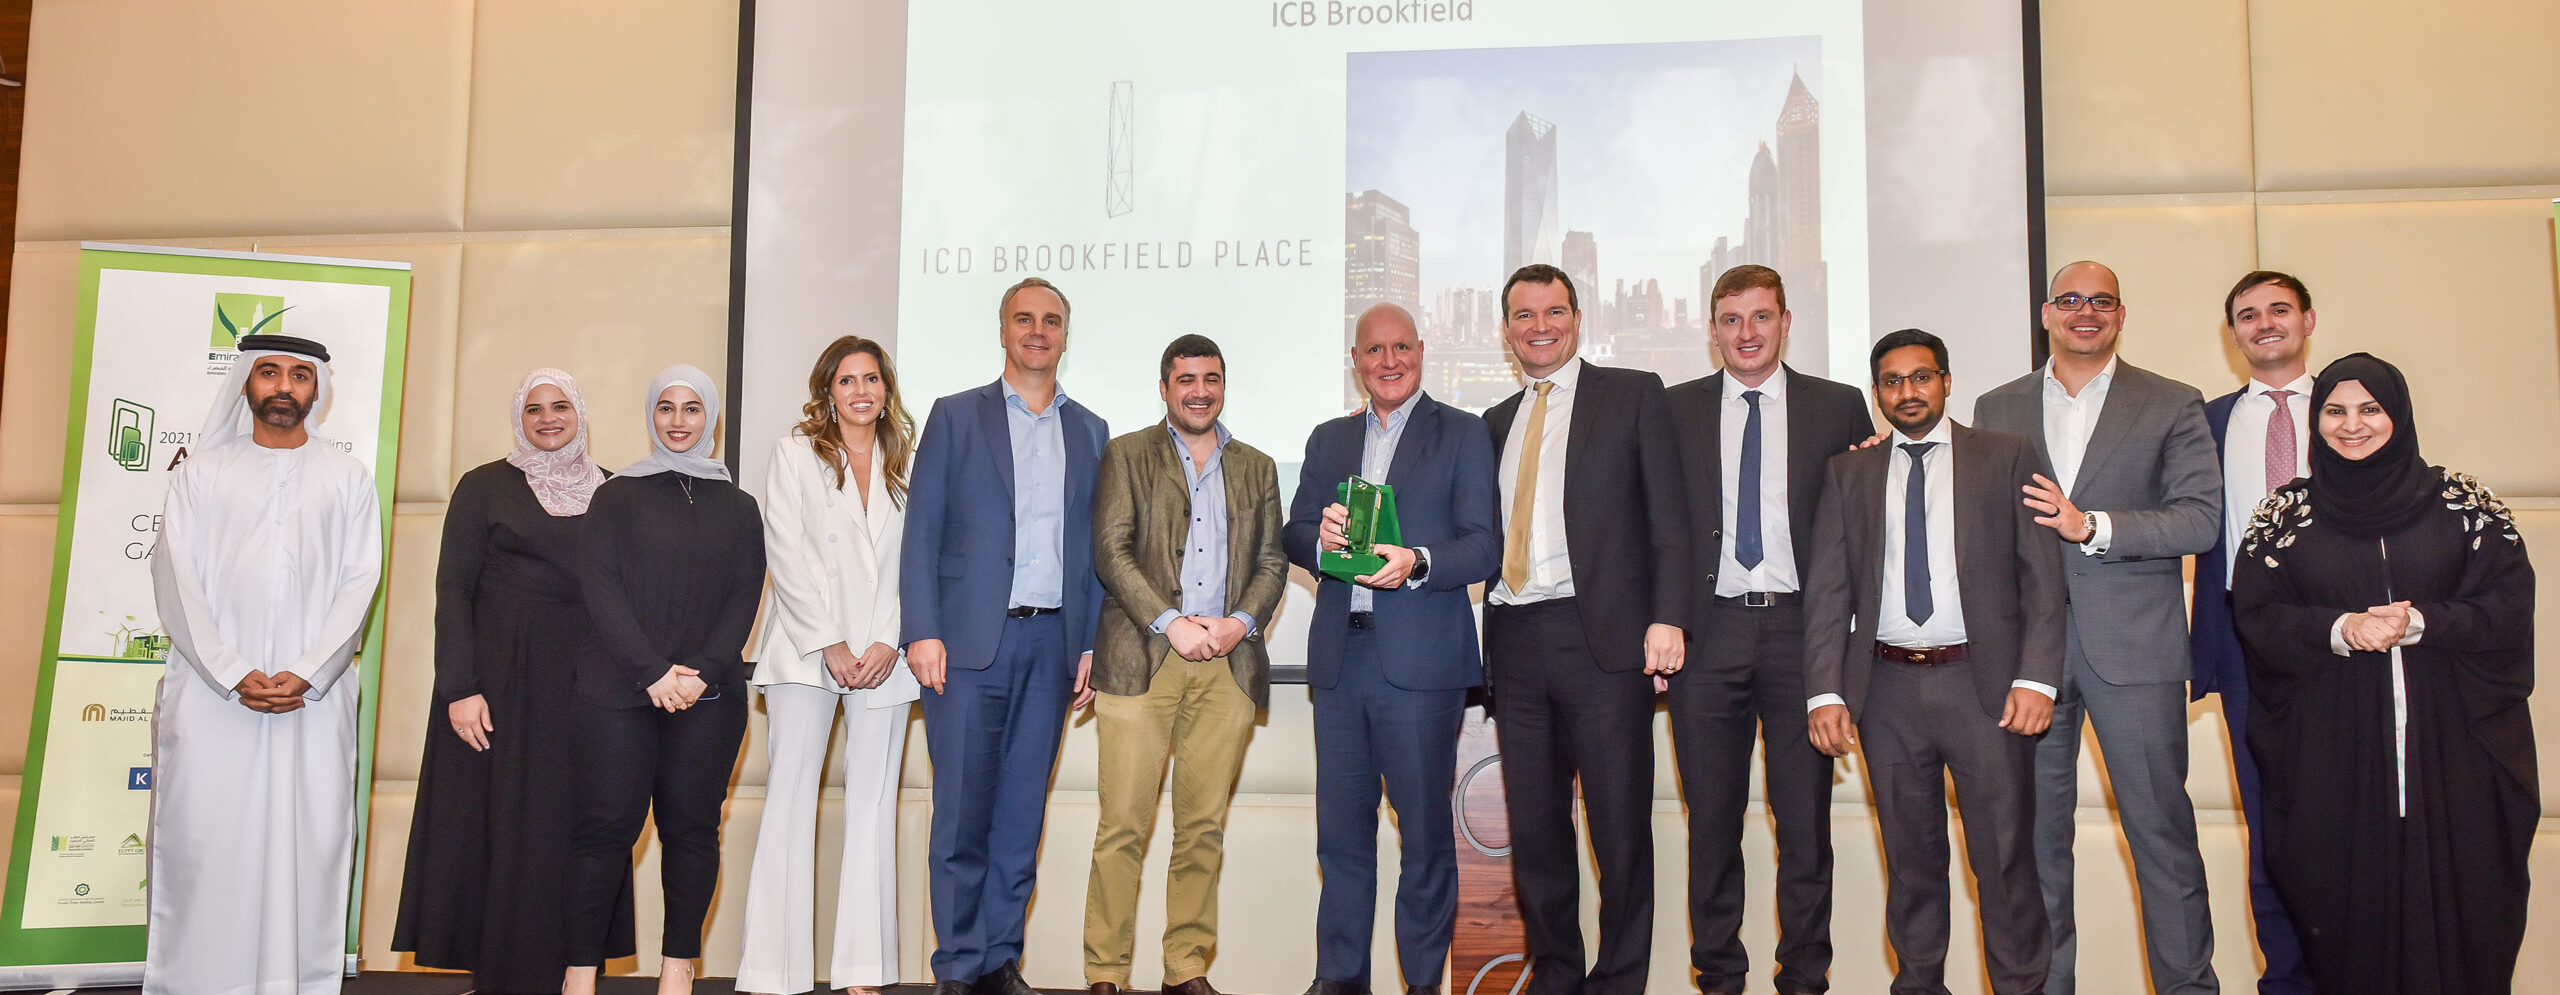 ICD Brookfield Place Dubai Taking the top spot (twice!) at the MENA Green Building Awards